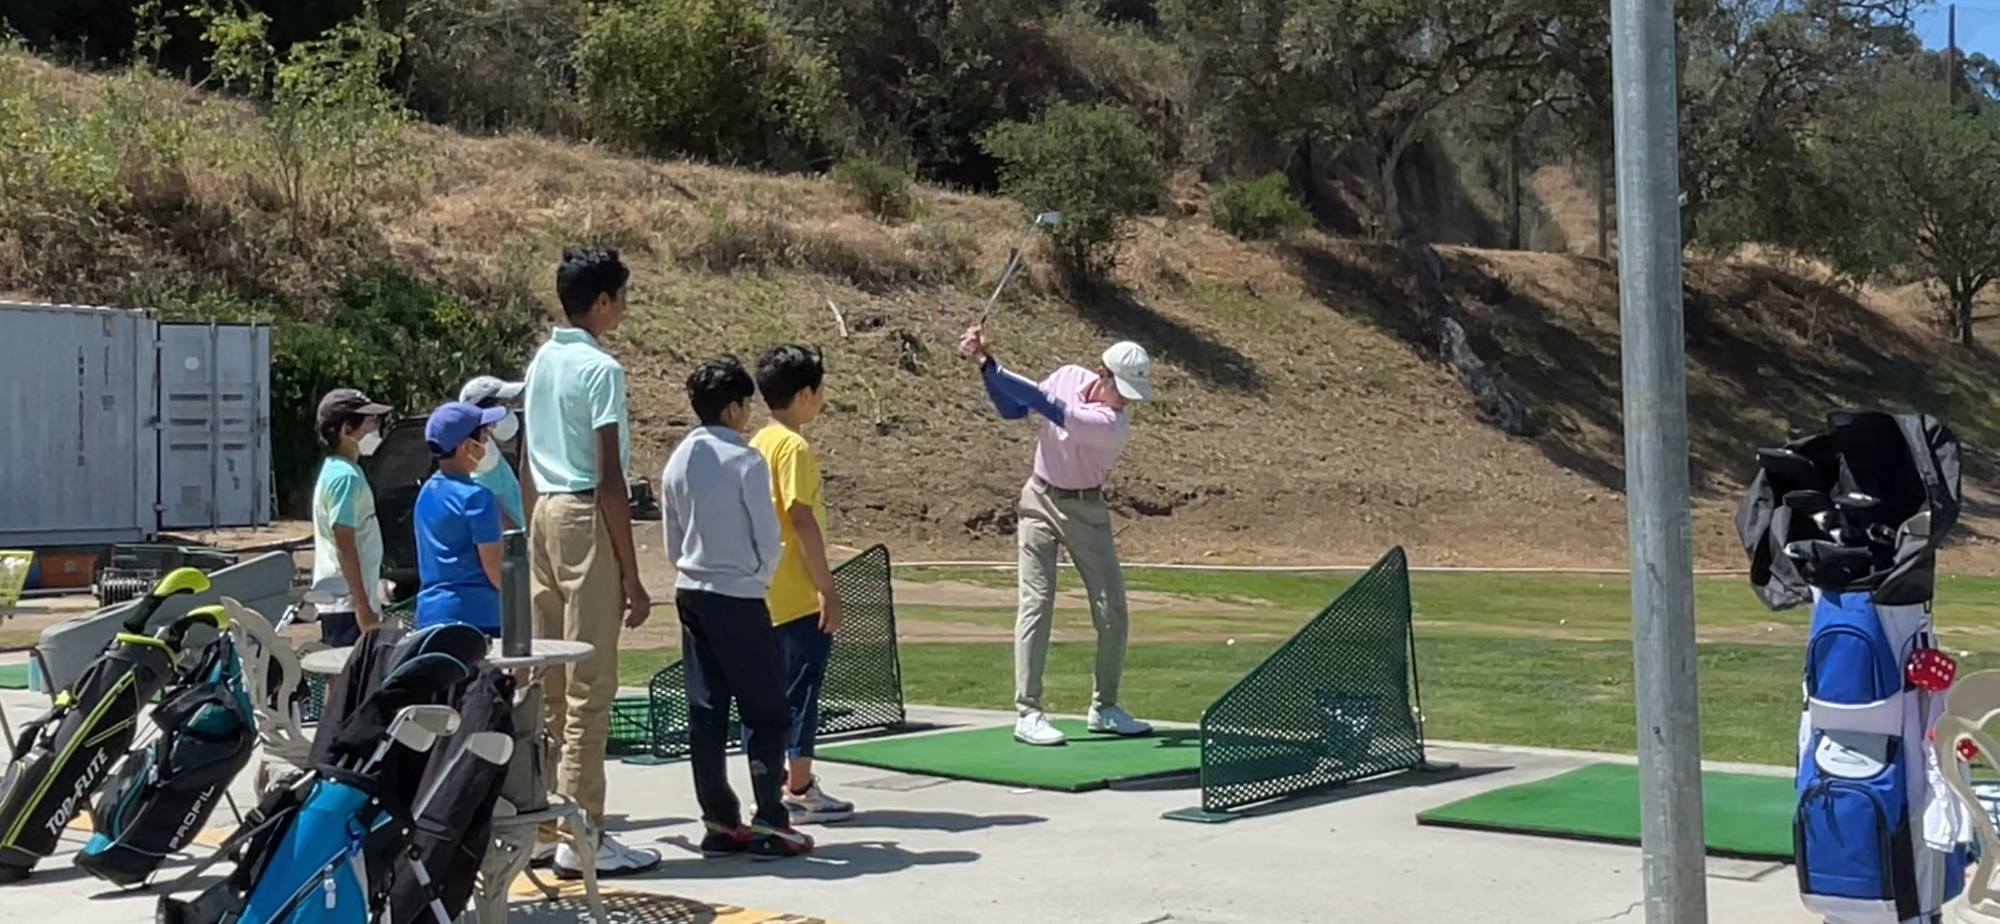 Golf Upgrades Golf Coach in San Diego, Jacob Williams, PGA Associate teaching young golfers by demonstrating a golf swing at Sorrento Canyon Golf Center located in San Diego, CA.